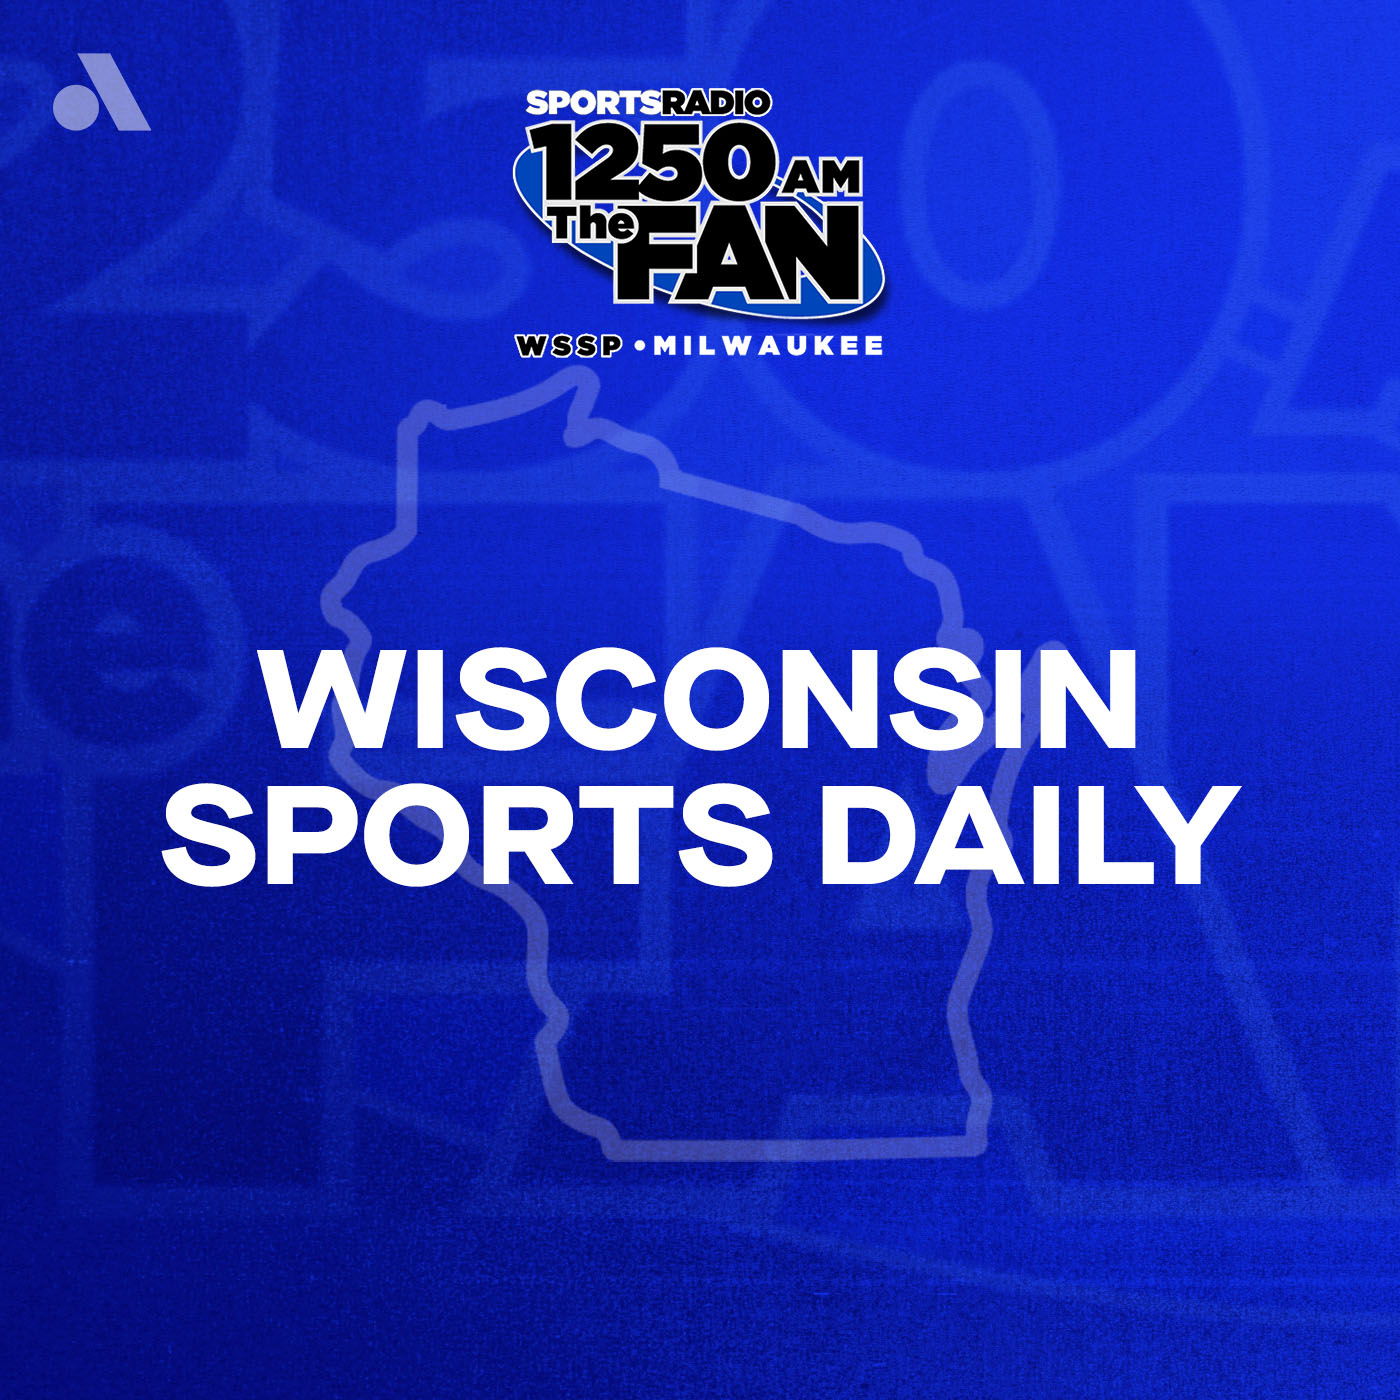 Tuesday, April 16th: Second Hour of Wisconsin Sports Daily